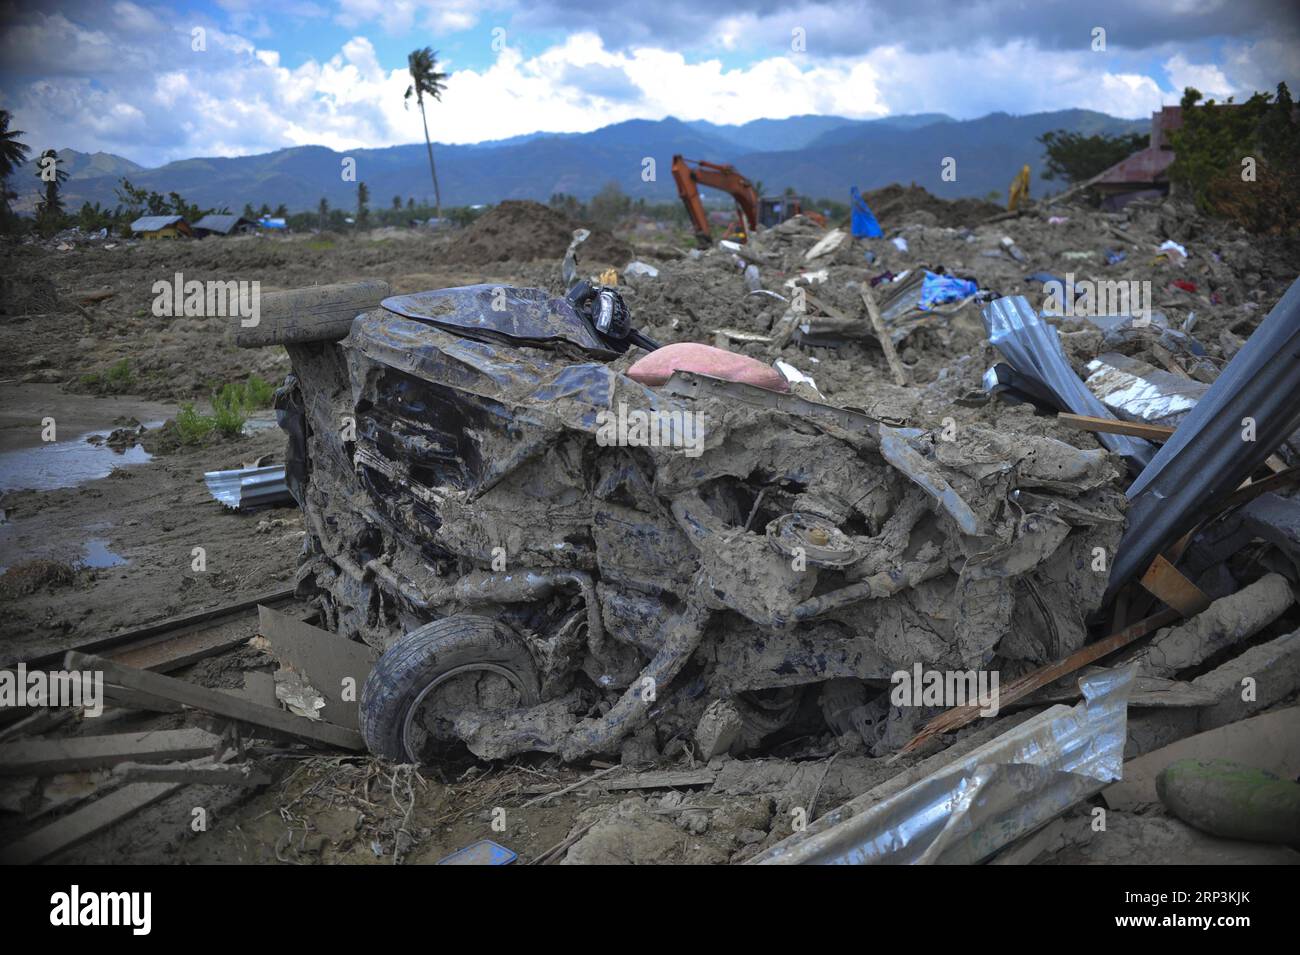 (181010) -- POSO, Oct. 10, 2018 -- Debries are seen in Poso, Central Sulawesi Province, Indonesia, on Oct. 9, 2018. The earthquakes and the tsunami have killed at least 2,010 people, left over 5,000 others missing and triggered massive damage and a huge evacuation, according to the national disaster management agency. ) (yy) INDONESIA-POSO-EARTHQUAKE AND TSUNAMI-AFTERMATH Zulkarnain PUBLICATIONxNOTxINxCHN Stock Photo